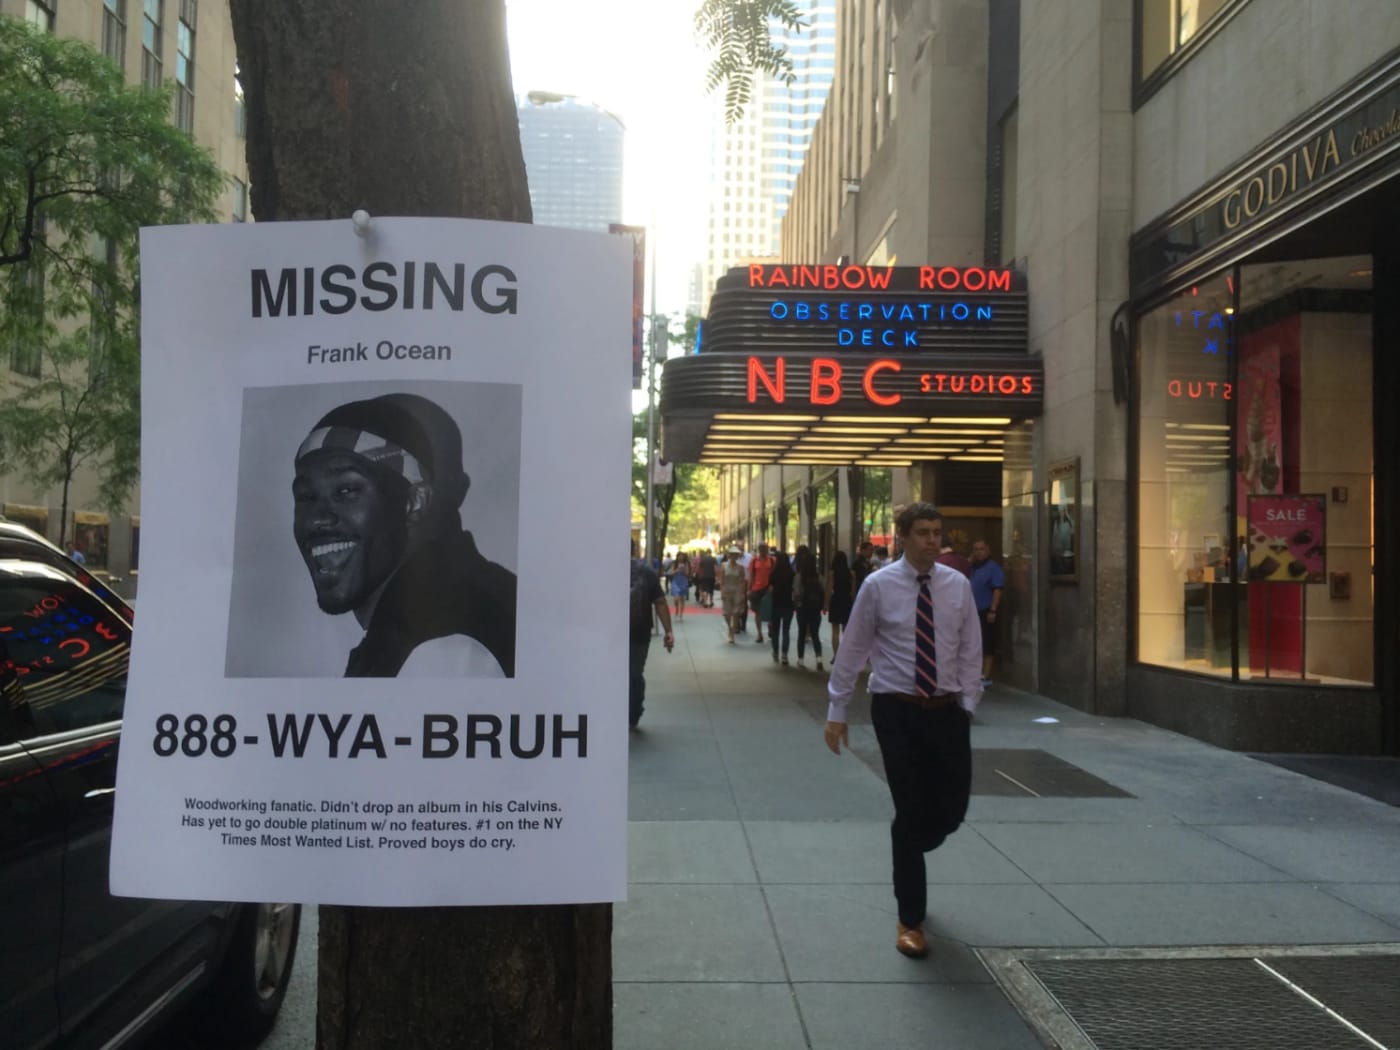 People are putting up Frank Ocean MISSING posters around NYC.